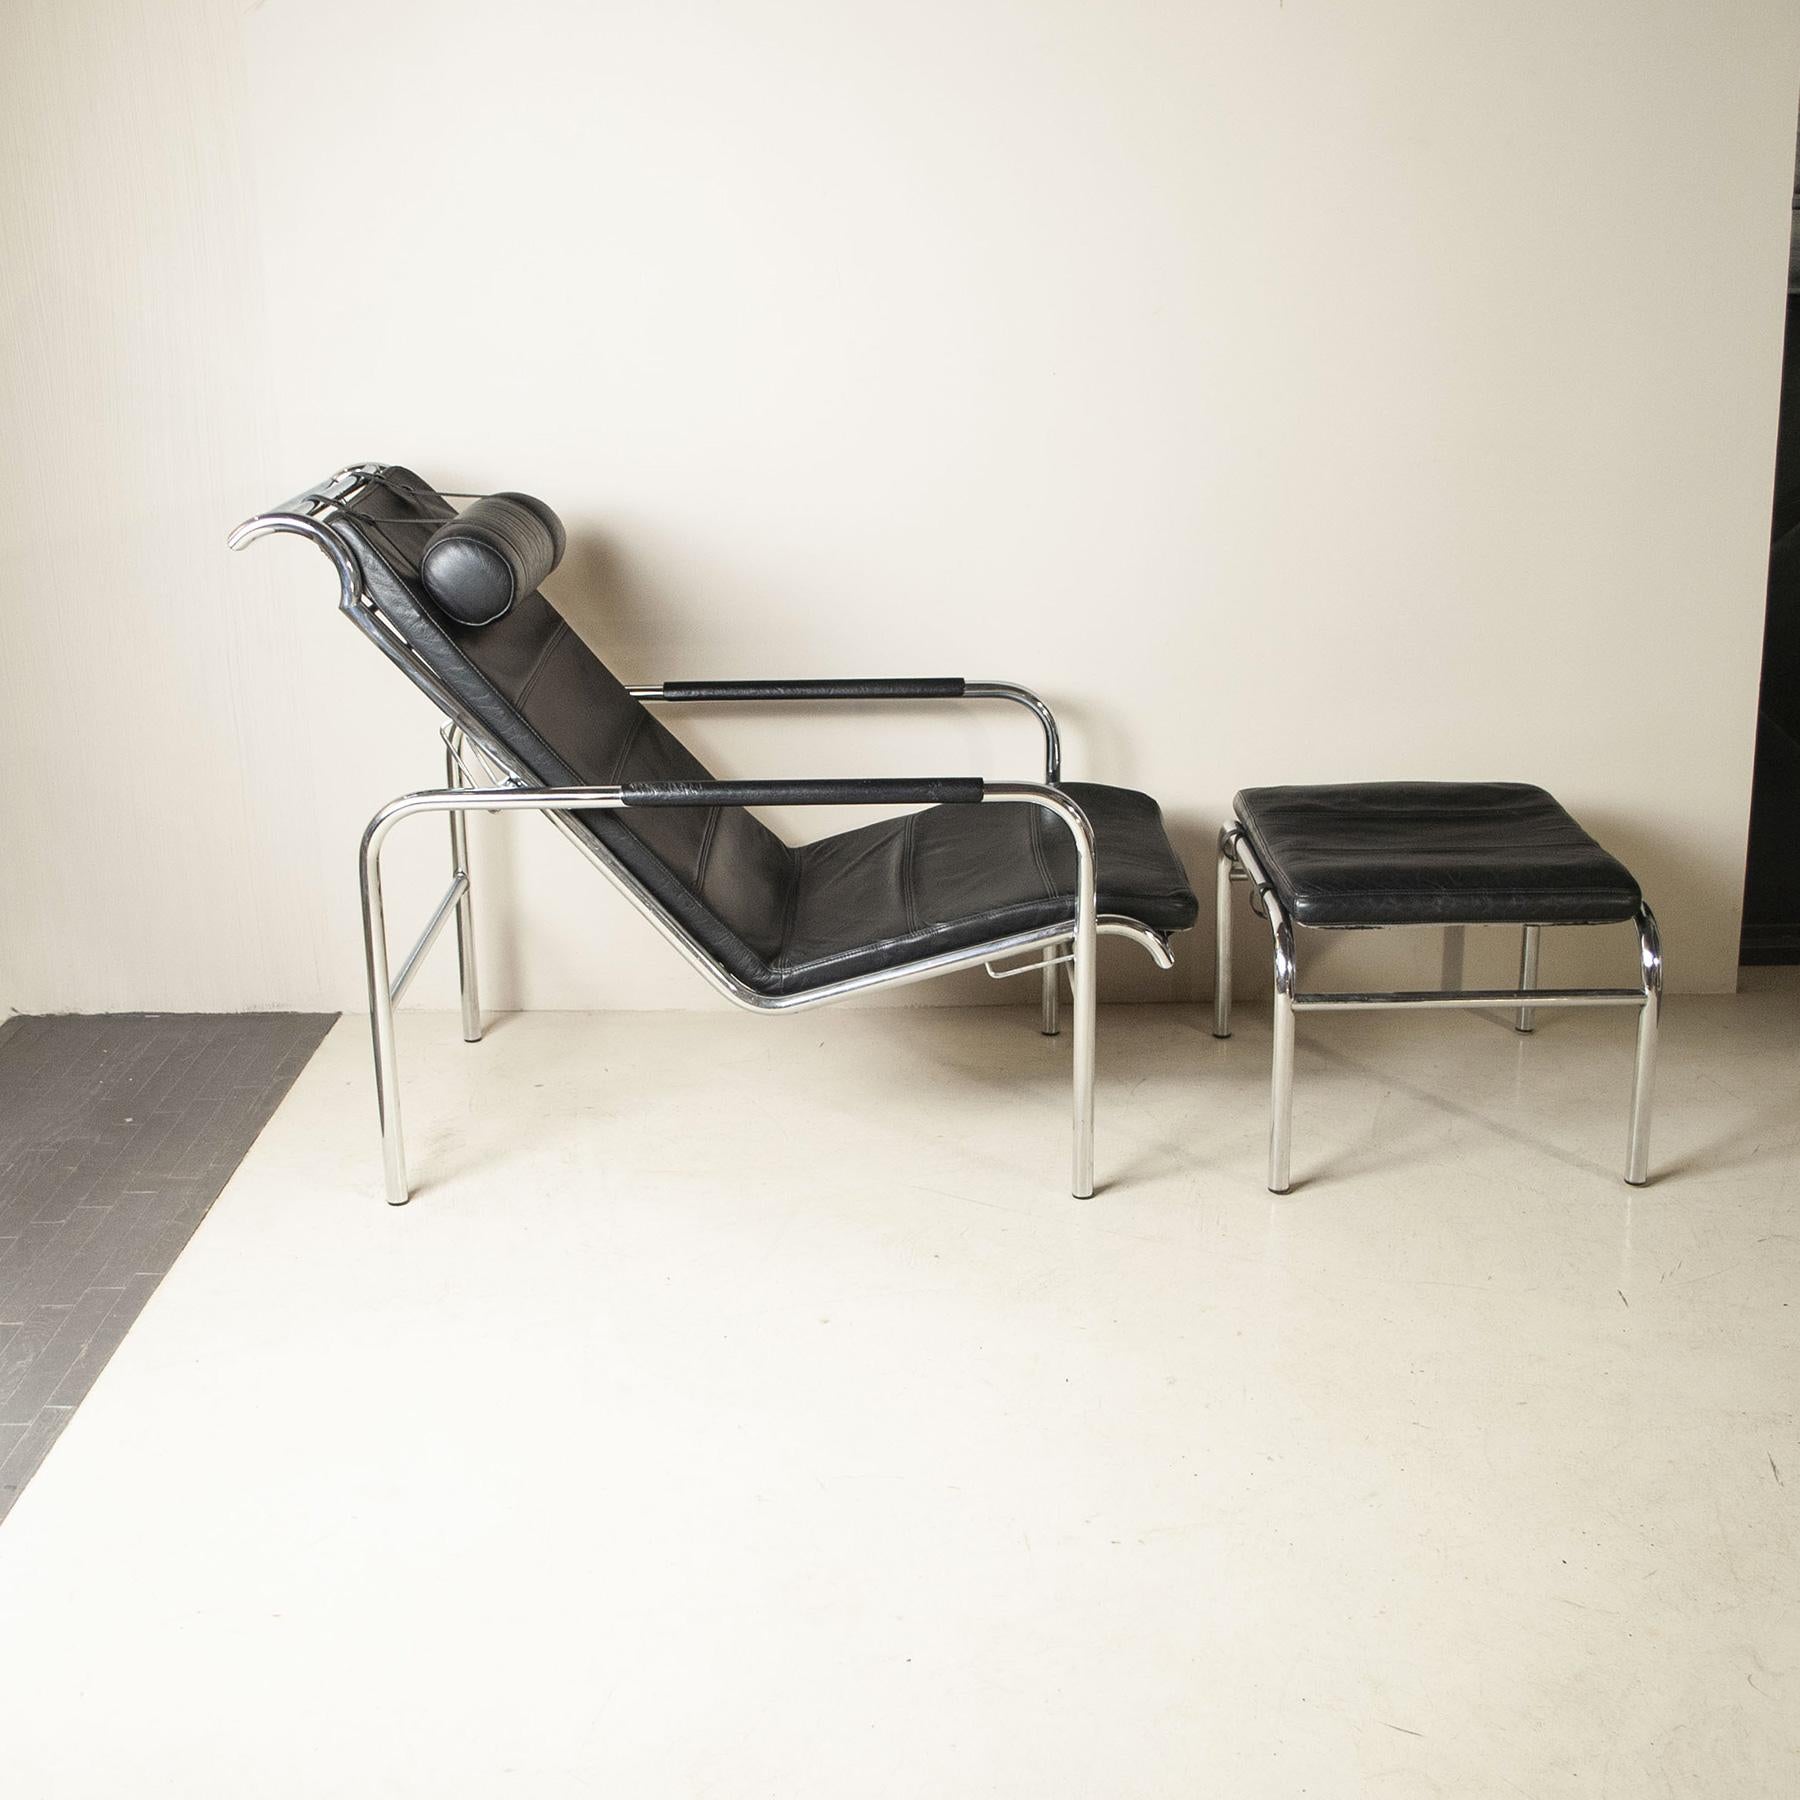 Steel Chaise Longue Genni for Zanotto by Gabriele Mucchi 70s For Sale